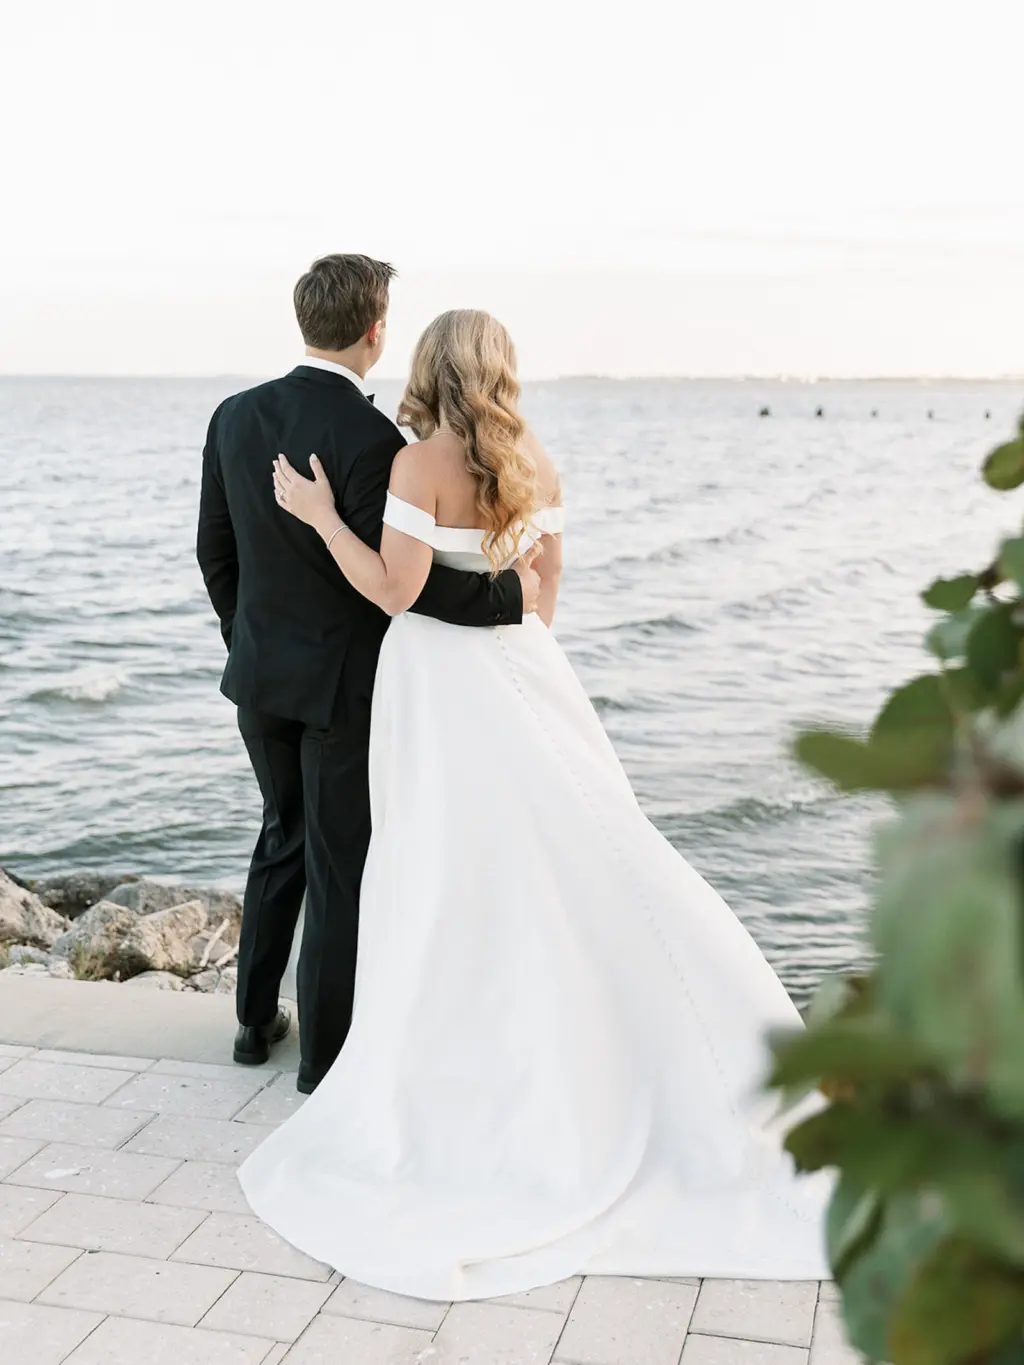 Bride and Groom Looking Out into the Water Sunset Wedding Portrait | South Tampa Venue Tampa Yacht and Country Club | Planner EventFull Weddings